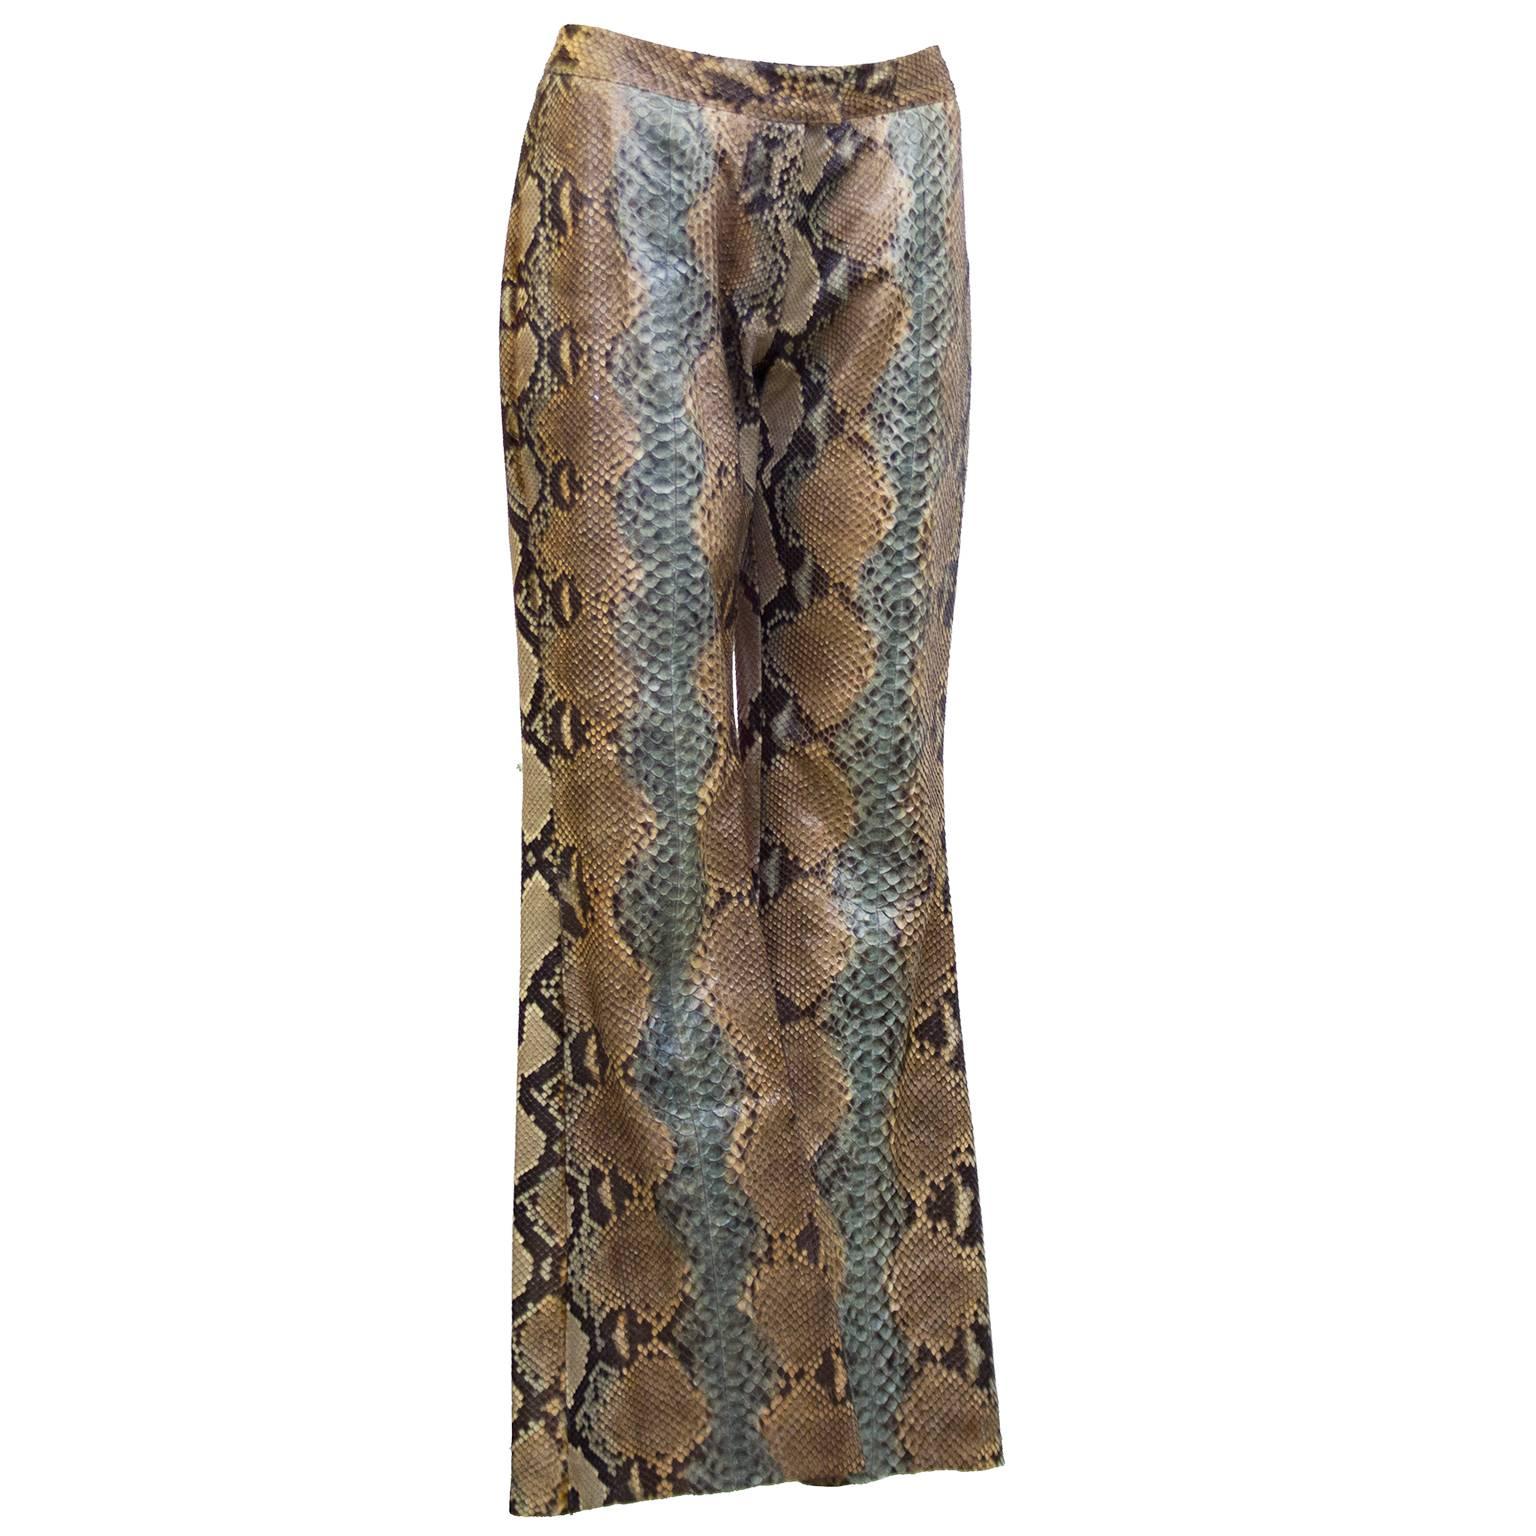 Immaculate genuine python leather trousers by Tom Ford for Gucci from SS2000. Natural color with dusty rose and light turquoise accent down the front of the flared leg. Zipper and tab closure. Marked IT 40. Fits like a US 2-4. In excellent unused